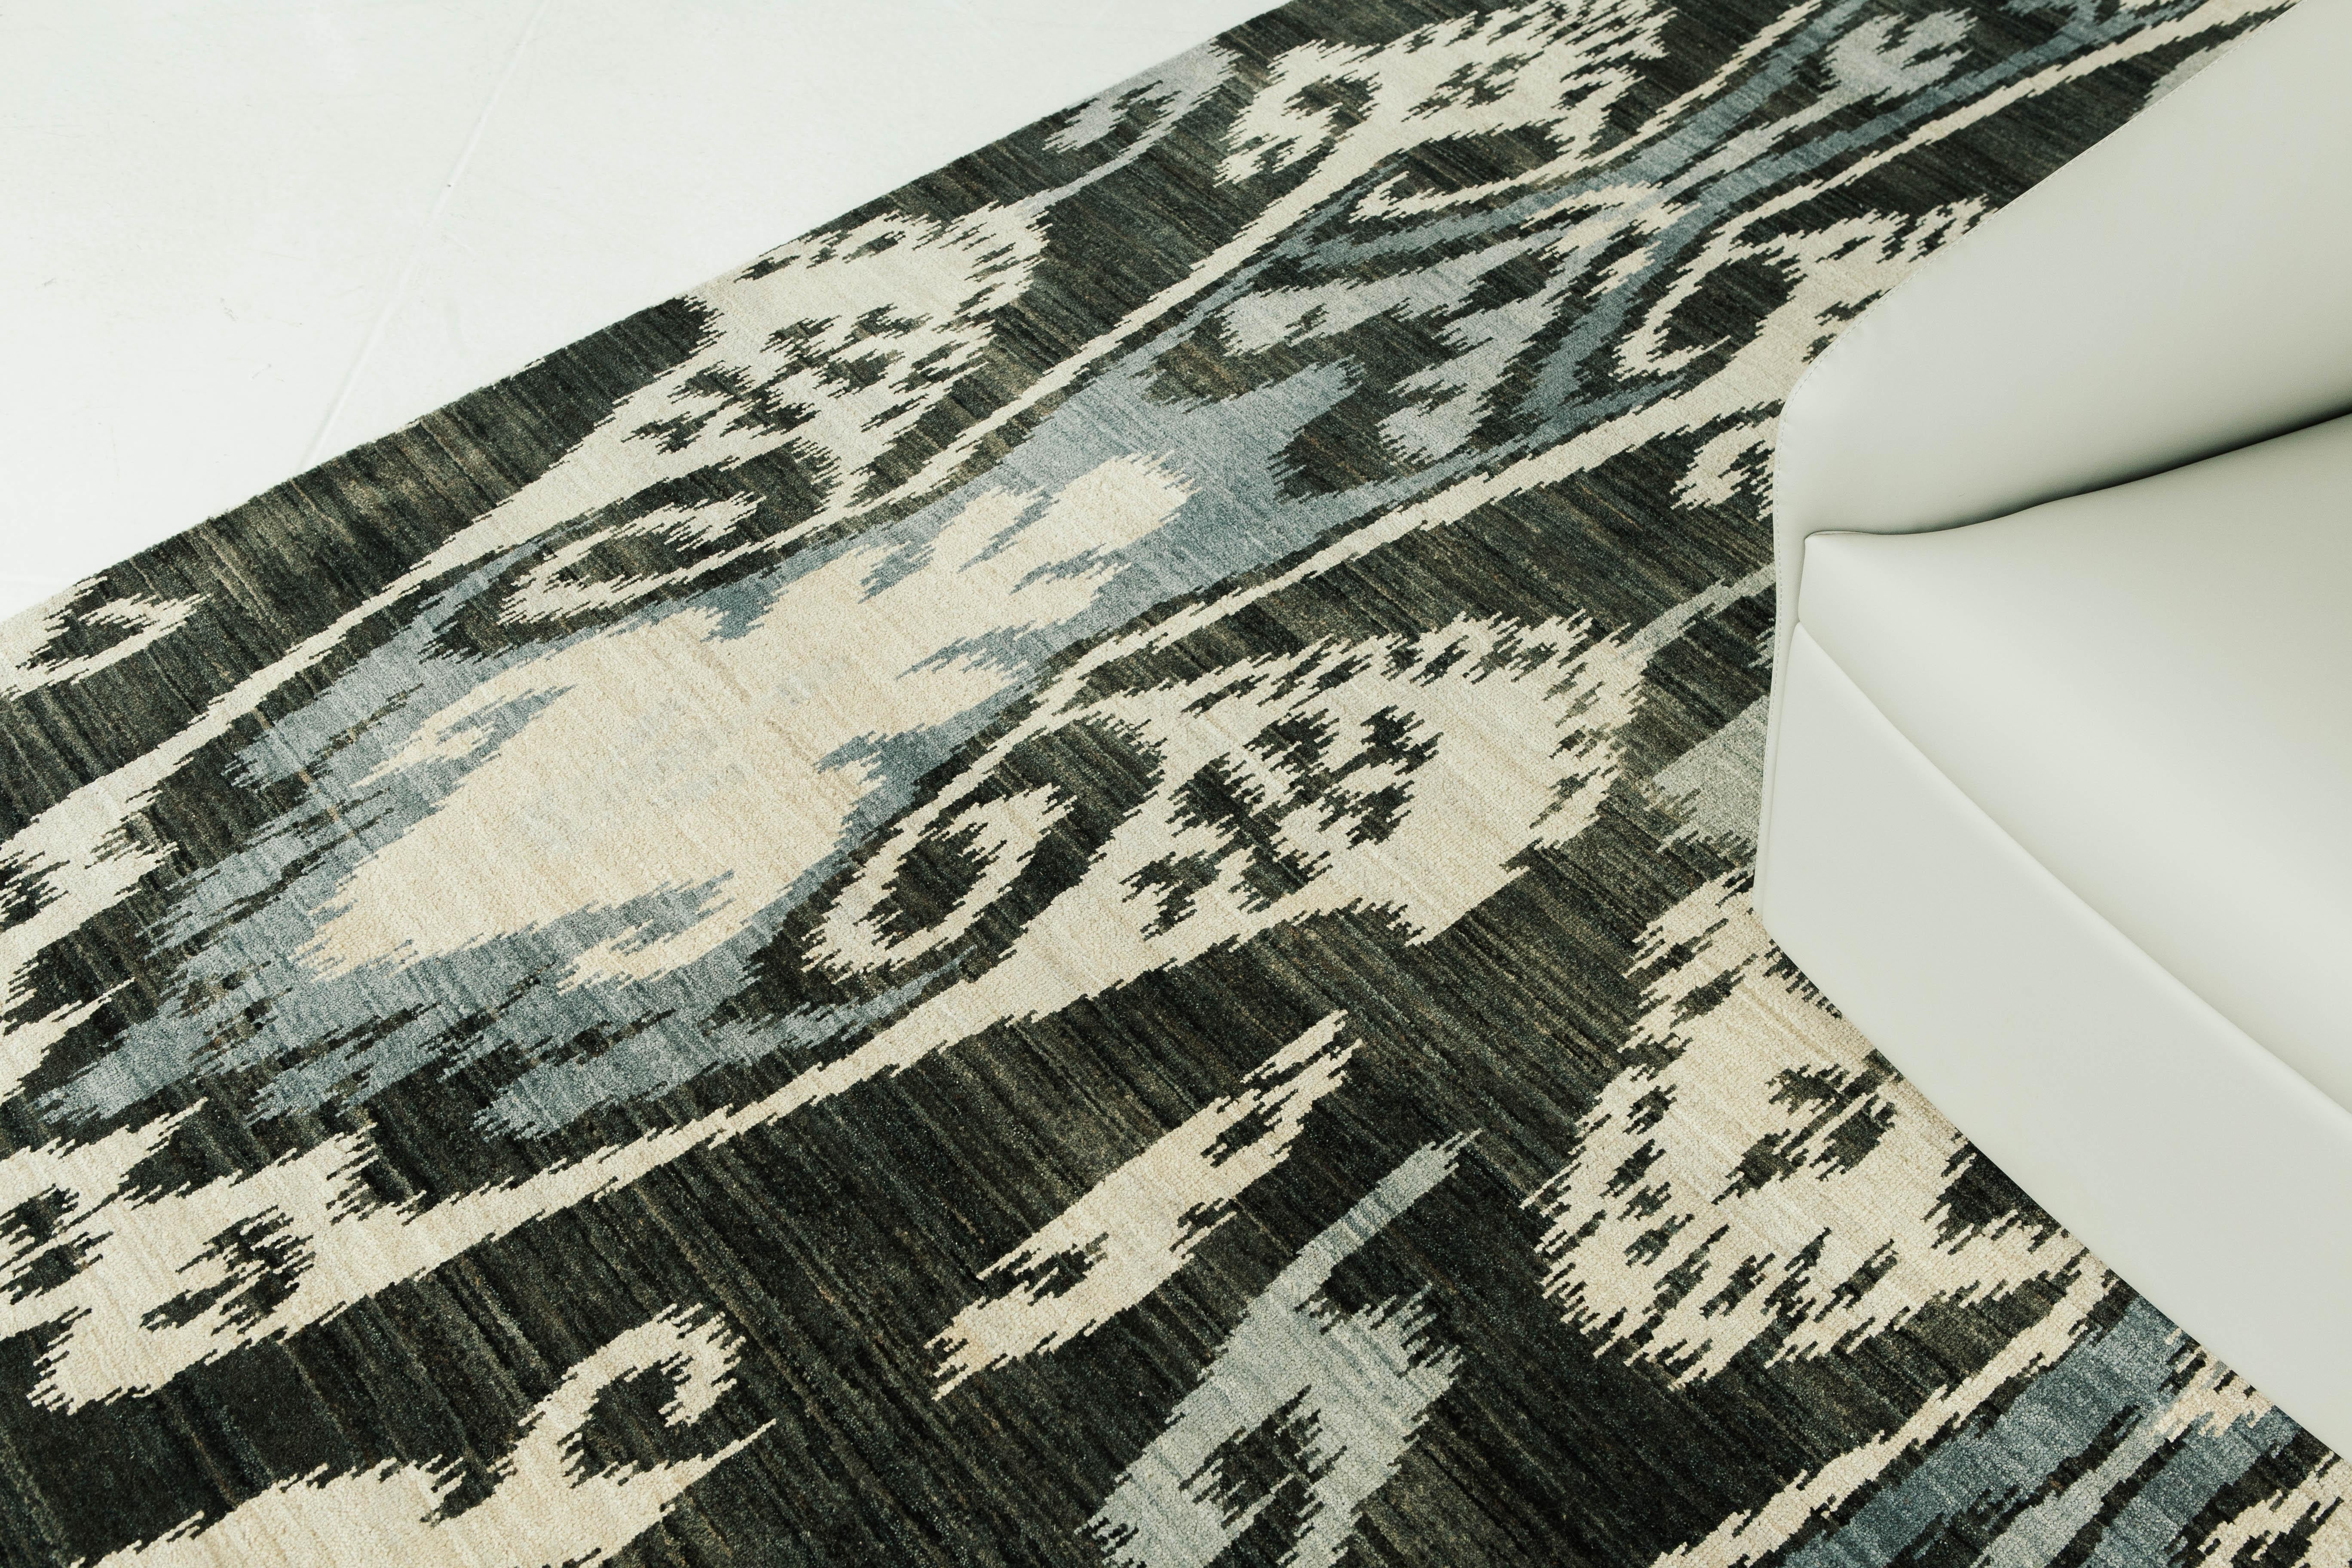 'Shahi' is a luxurious Ikat pile weave in black, ivory, and various hues of blue. Its playfully bold design will elevate any design space and leave lasting impressions. Ikat designs have been globally inspired for today's modern design